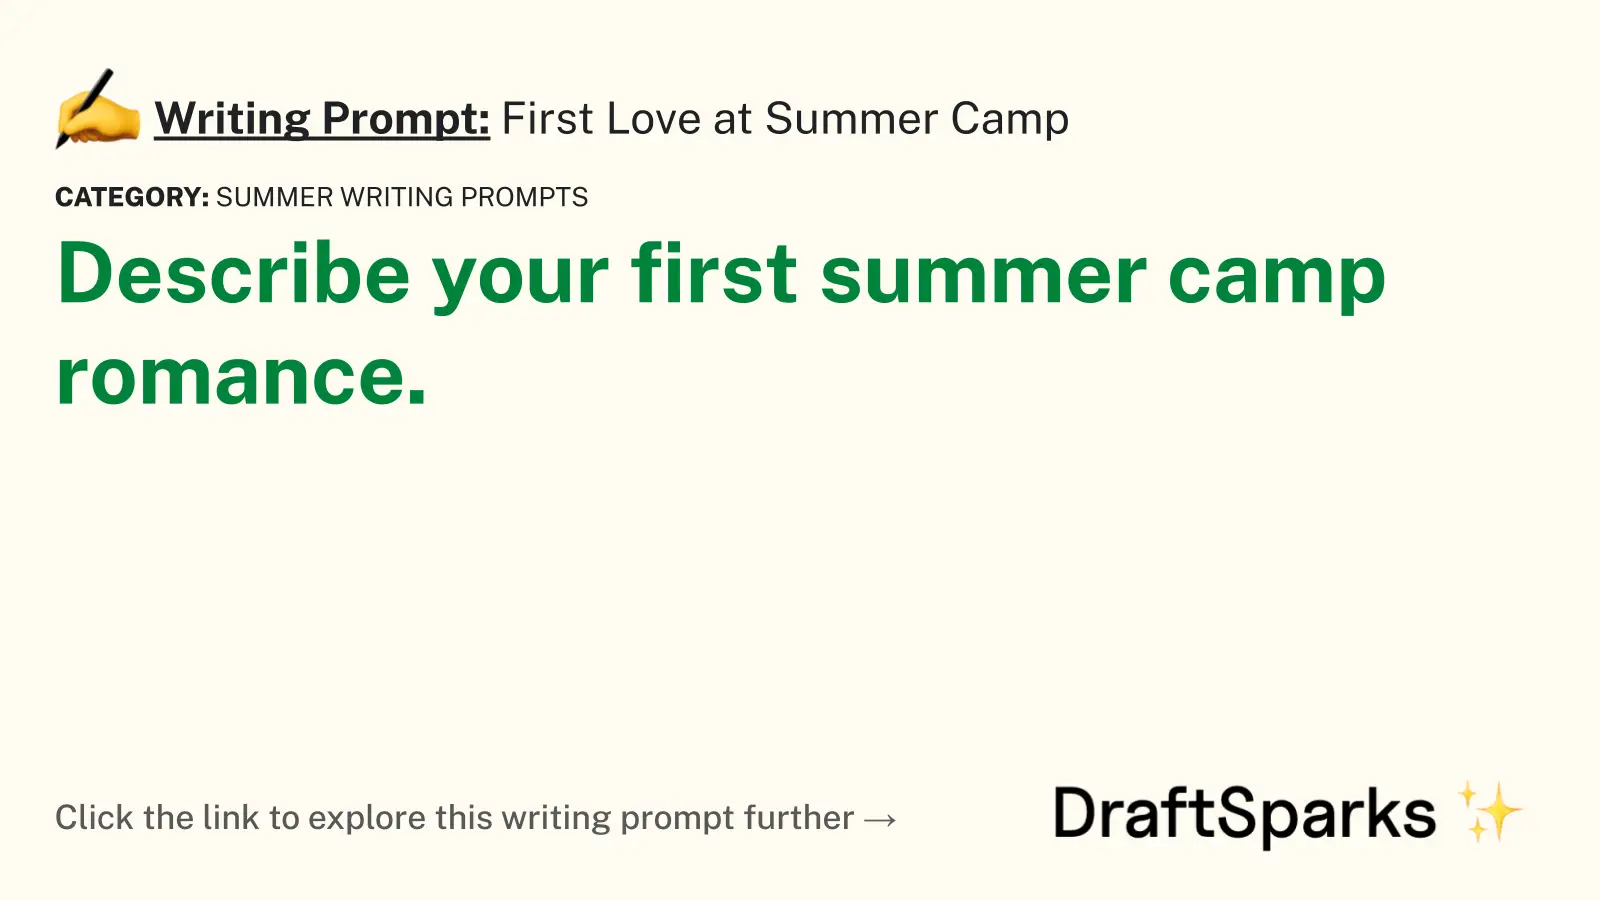 First Love at Summer Camp